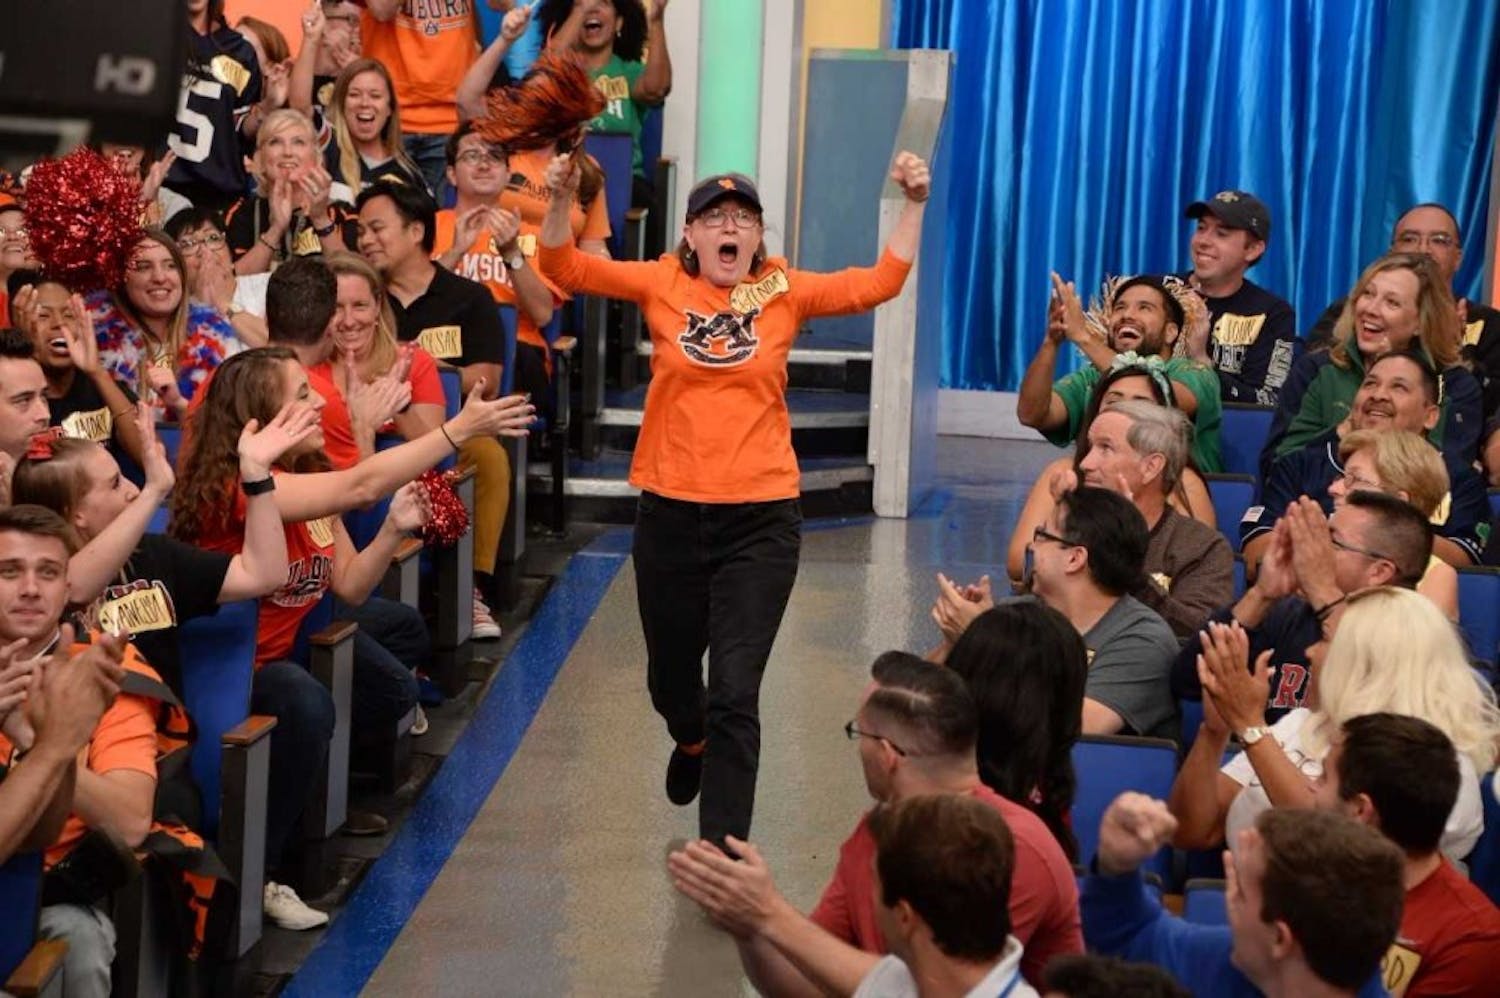 Glenda Tamblyn competes in "The Price Is Right."